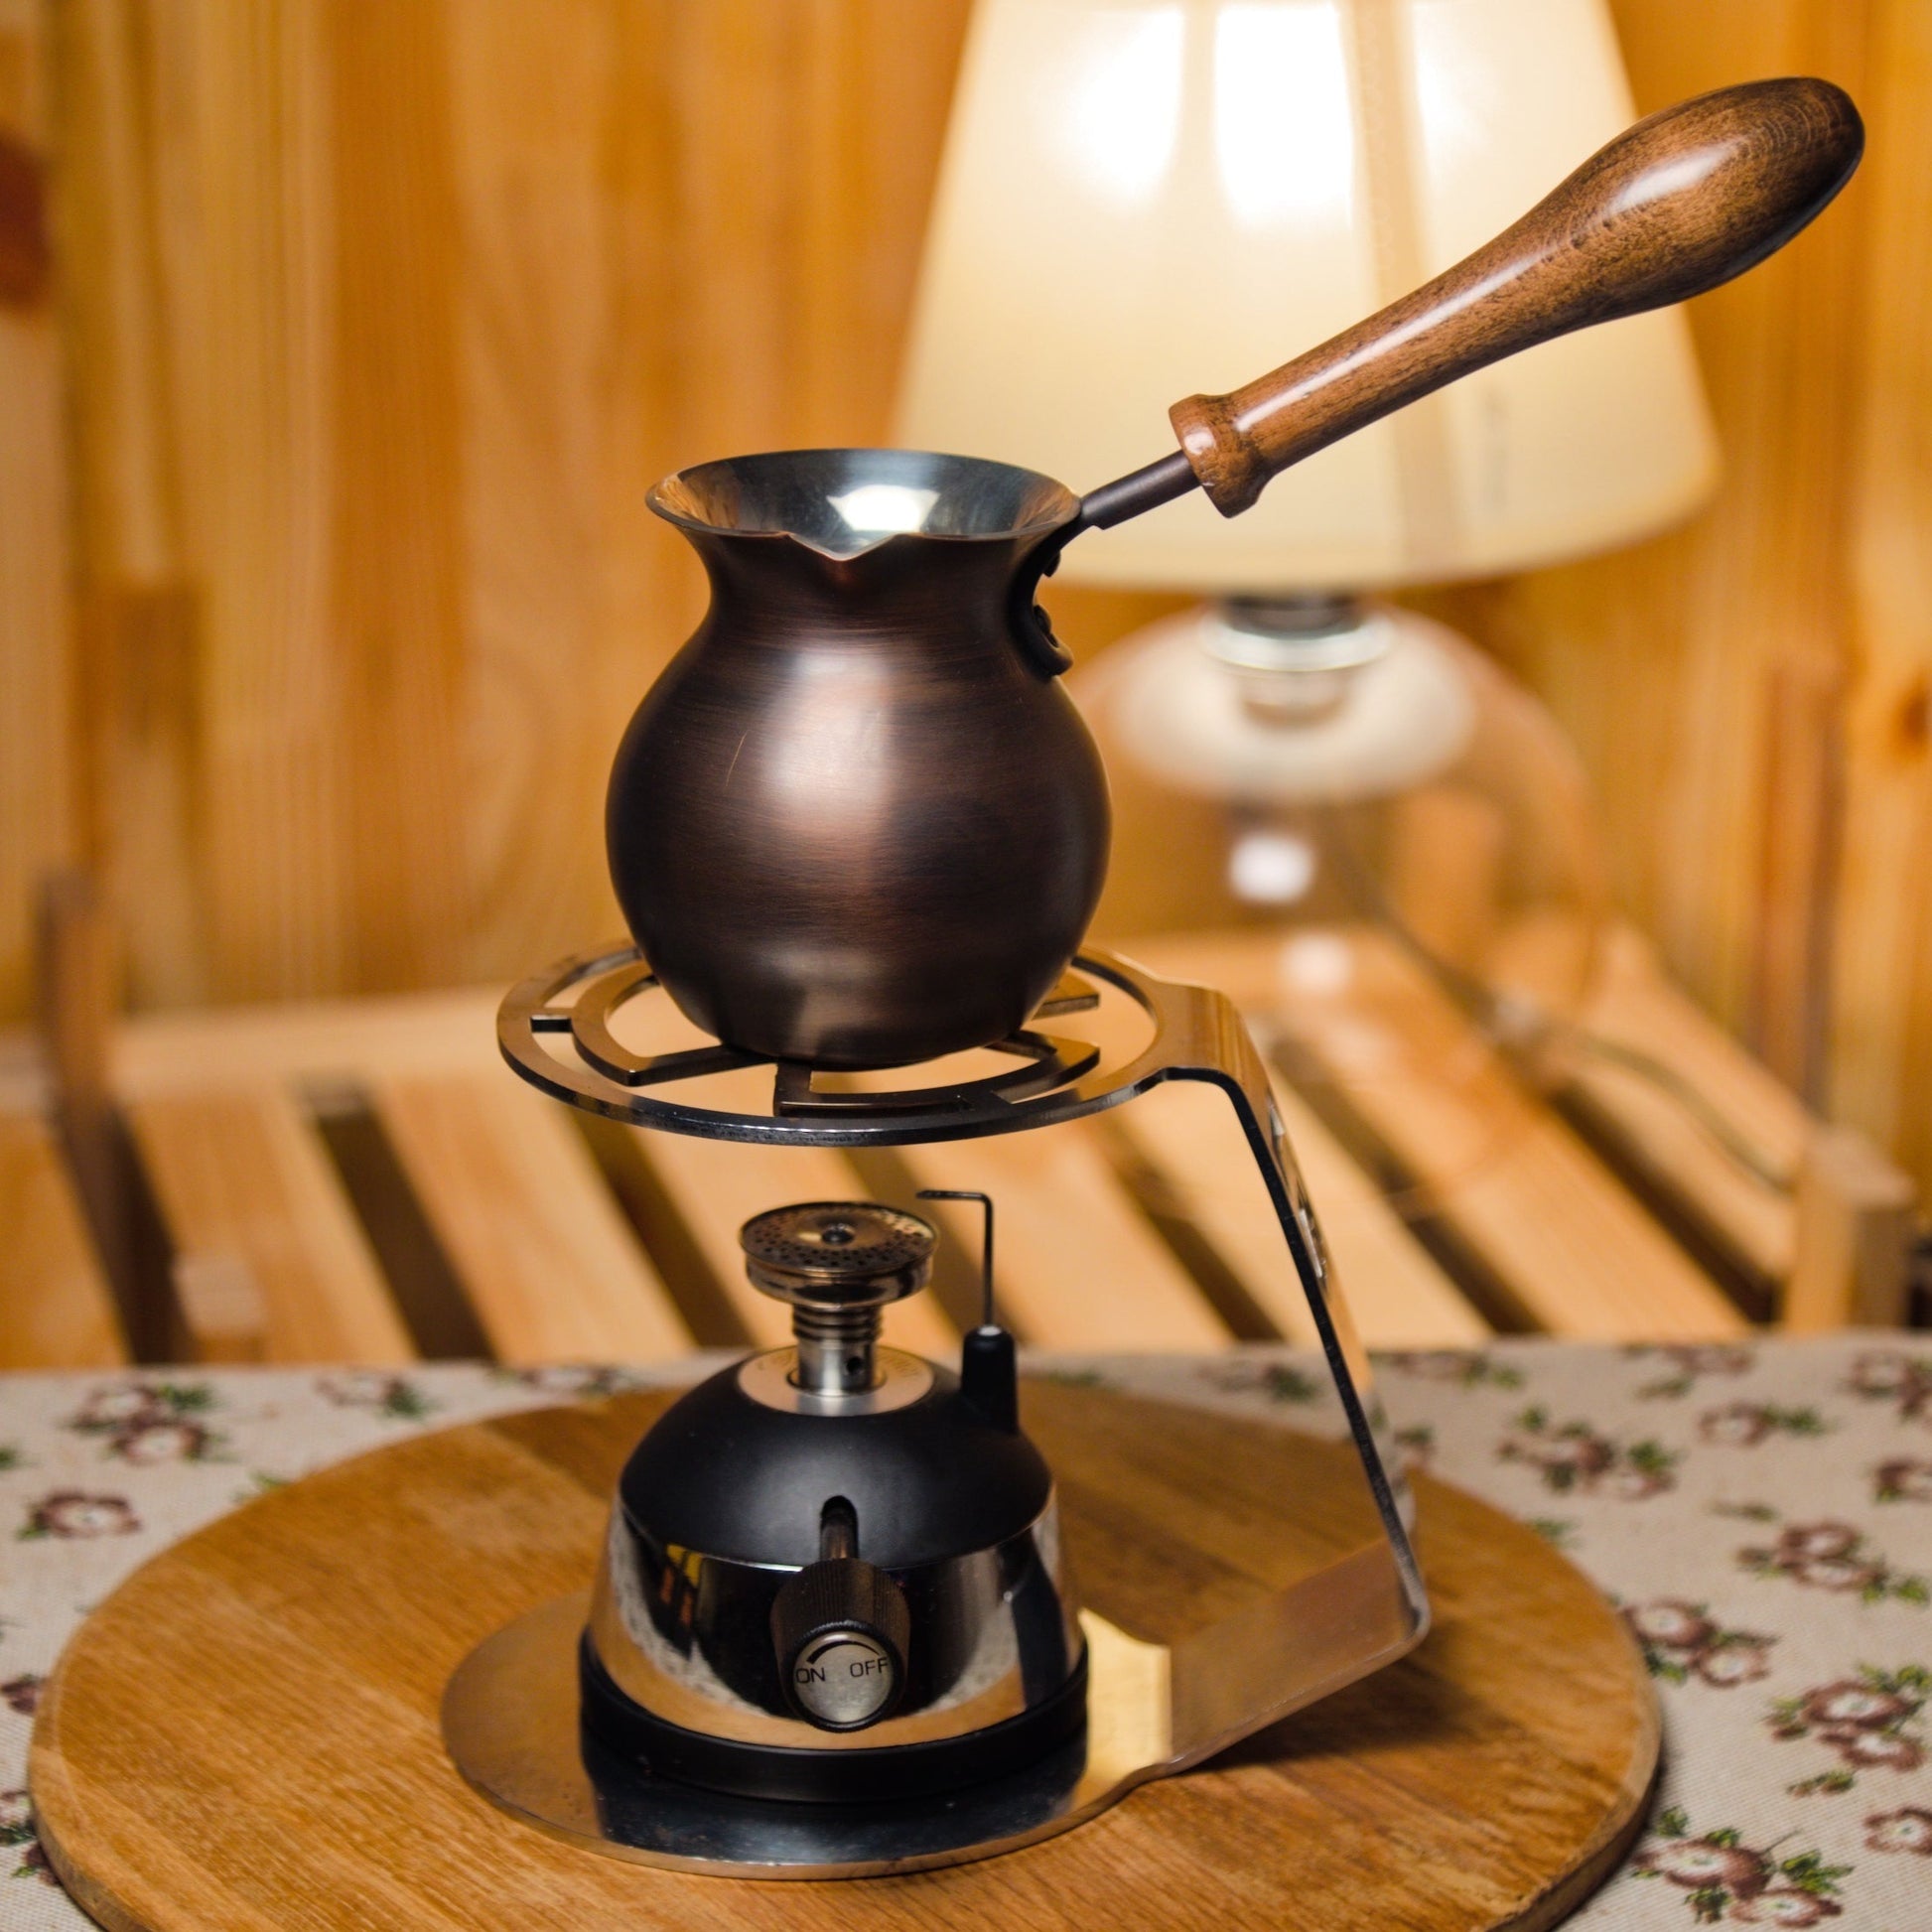 Ball shaped turkish coffee pot patina wooden handle for 1-2 persons on the stand with the micro burner